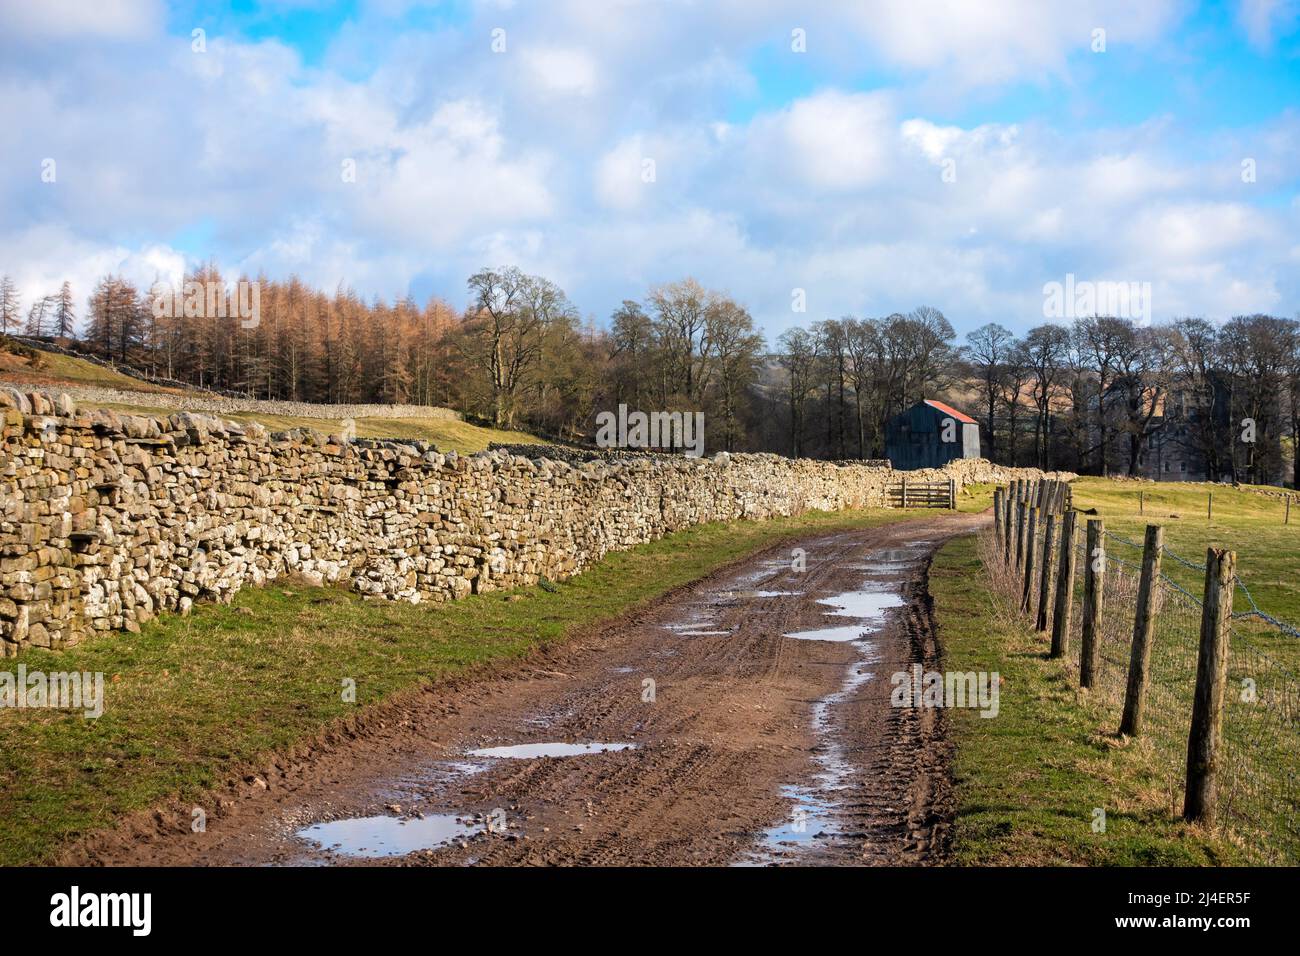 Rough track leading to Bolton Castle, Wensleydale, Yorkshire Dales National Park. Iconic dry stone walls enclose sheep pastures. Stock Photo